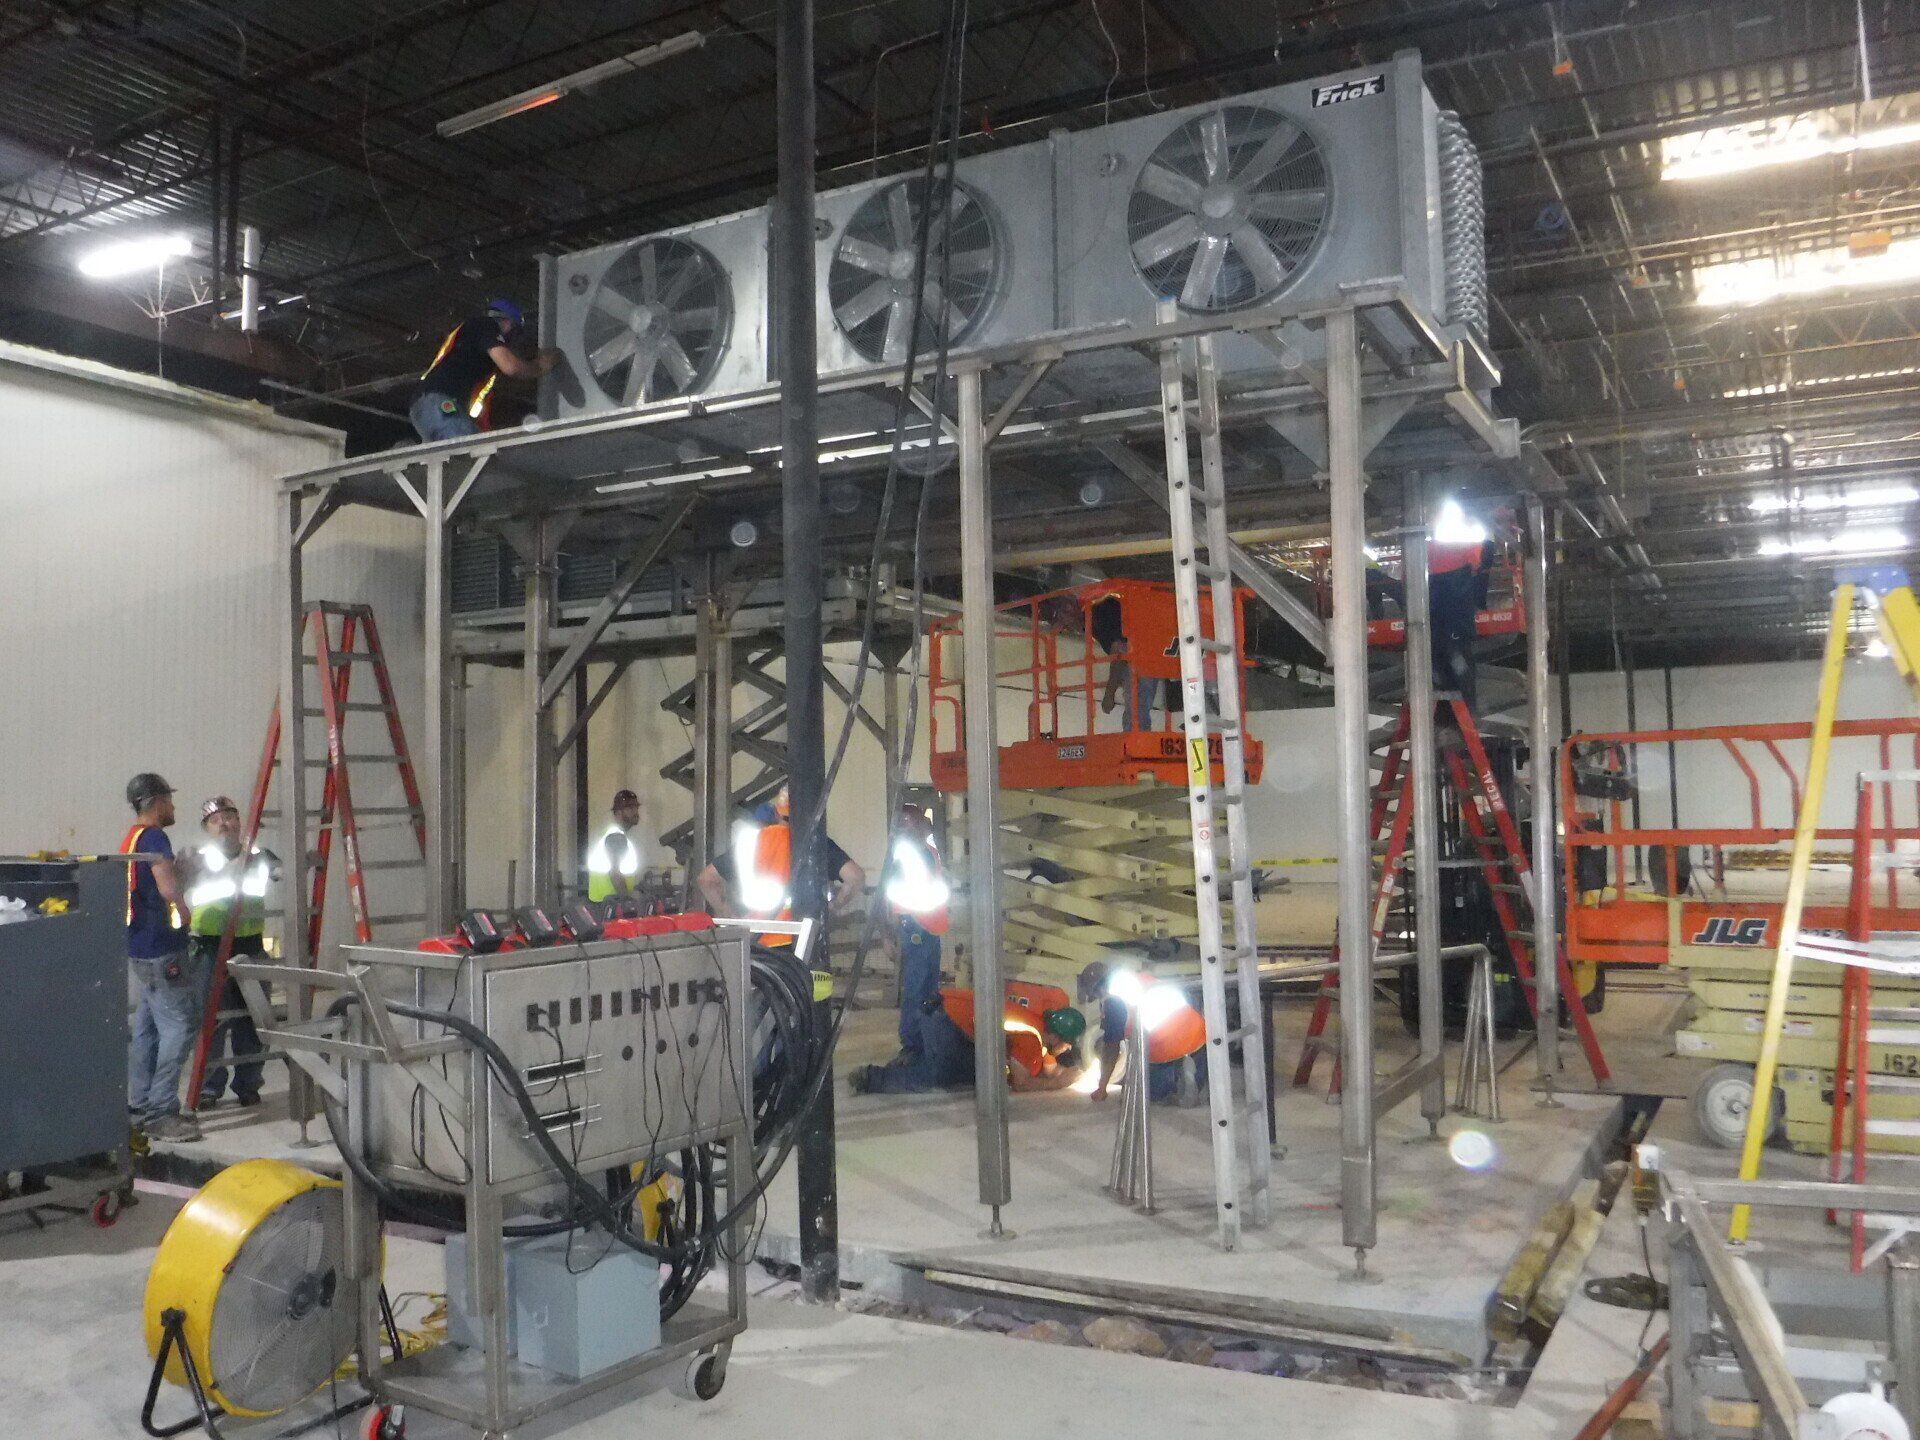 A group of people are working on a machine in a warehouse – USA - Regal Construction Inc.